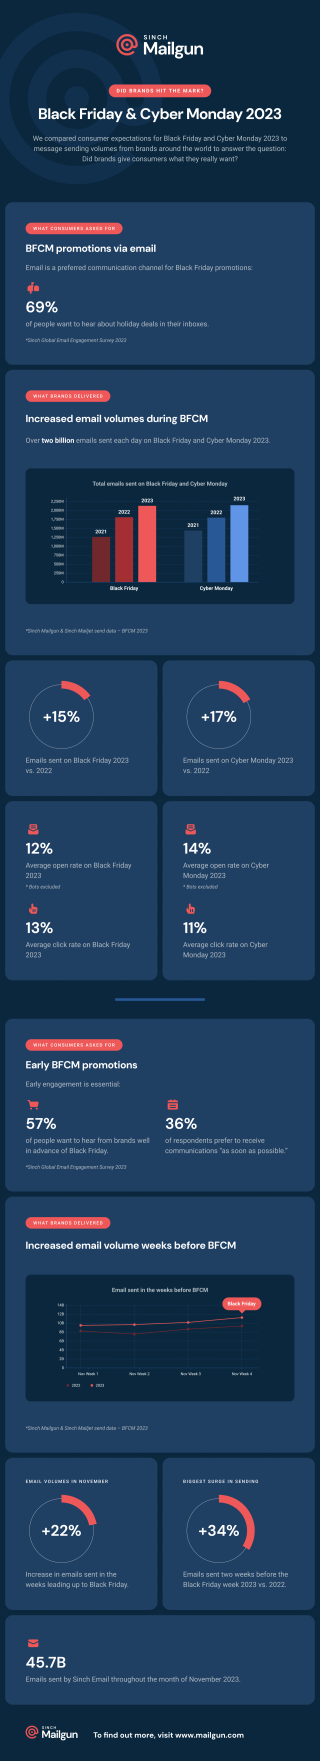 Black Friday and Cyber Monday 2023 email volumes infographic